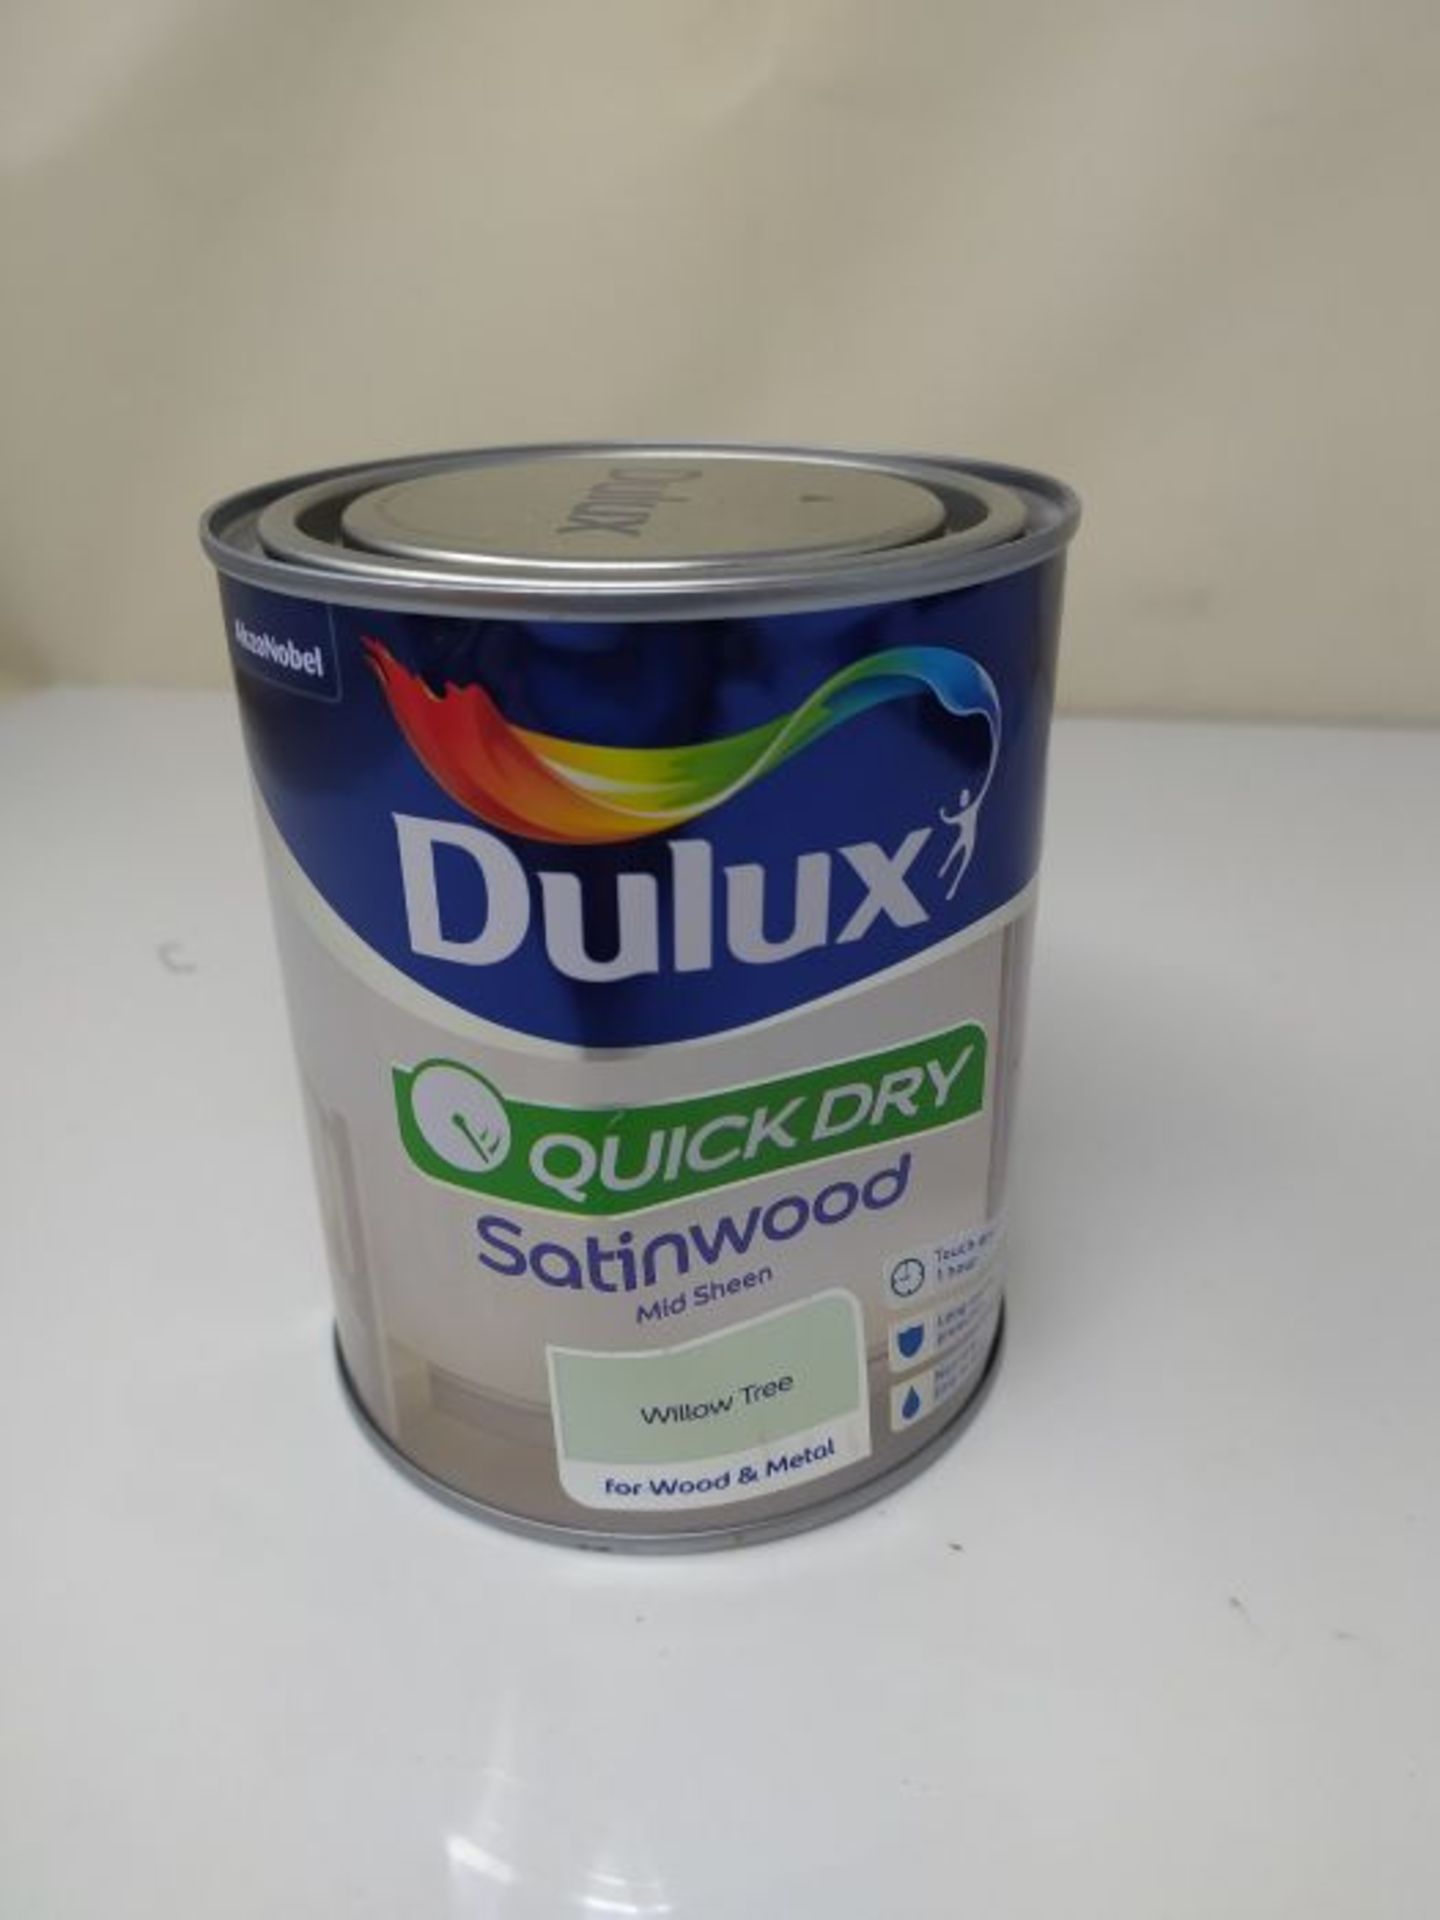 Dulux Quick Dry Satinwood Paint For Wood And Metal - Willow Tree 750Ml - Image 2 of 2